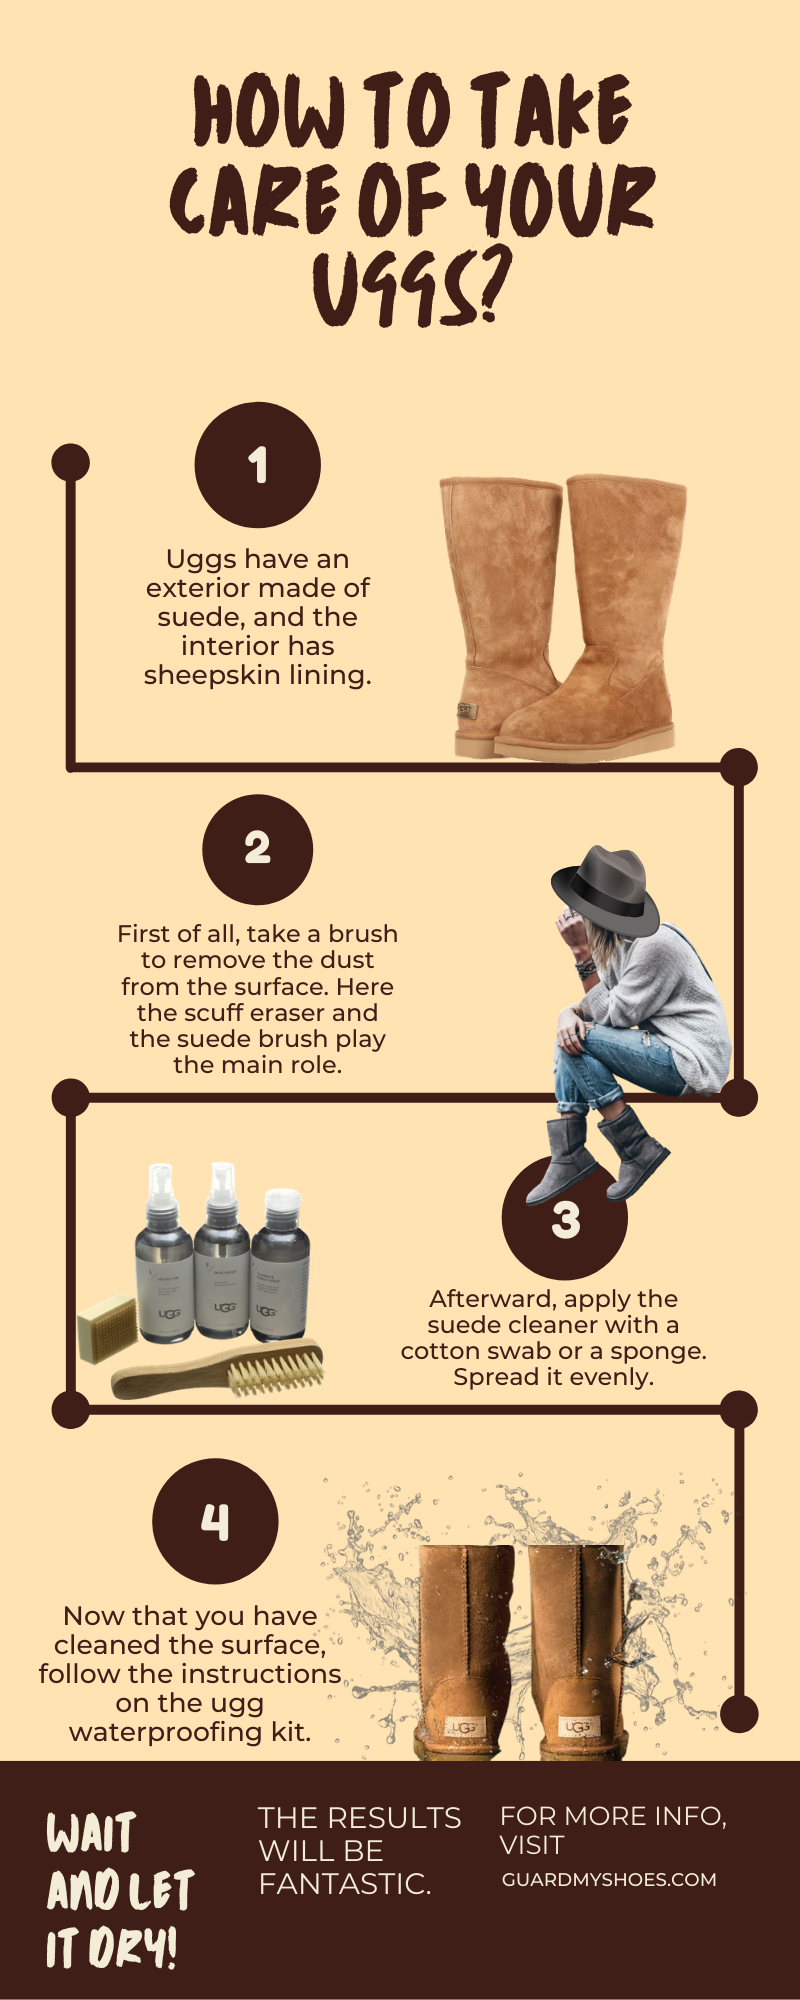 How to take care of your uggs?